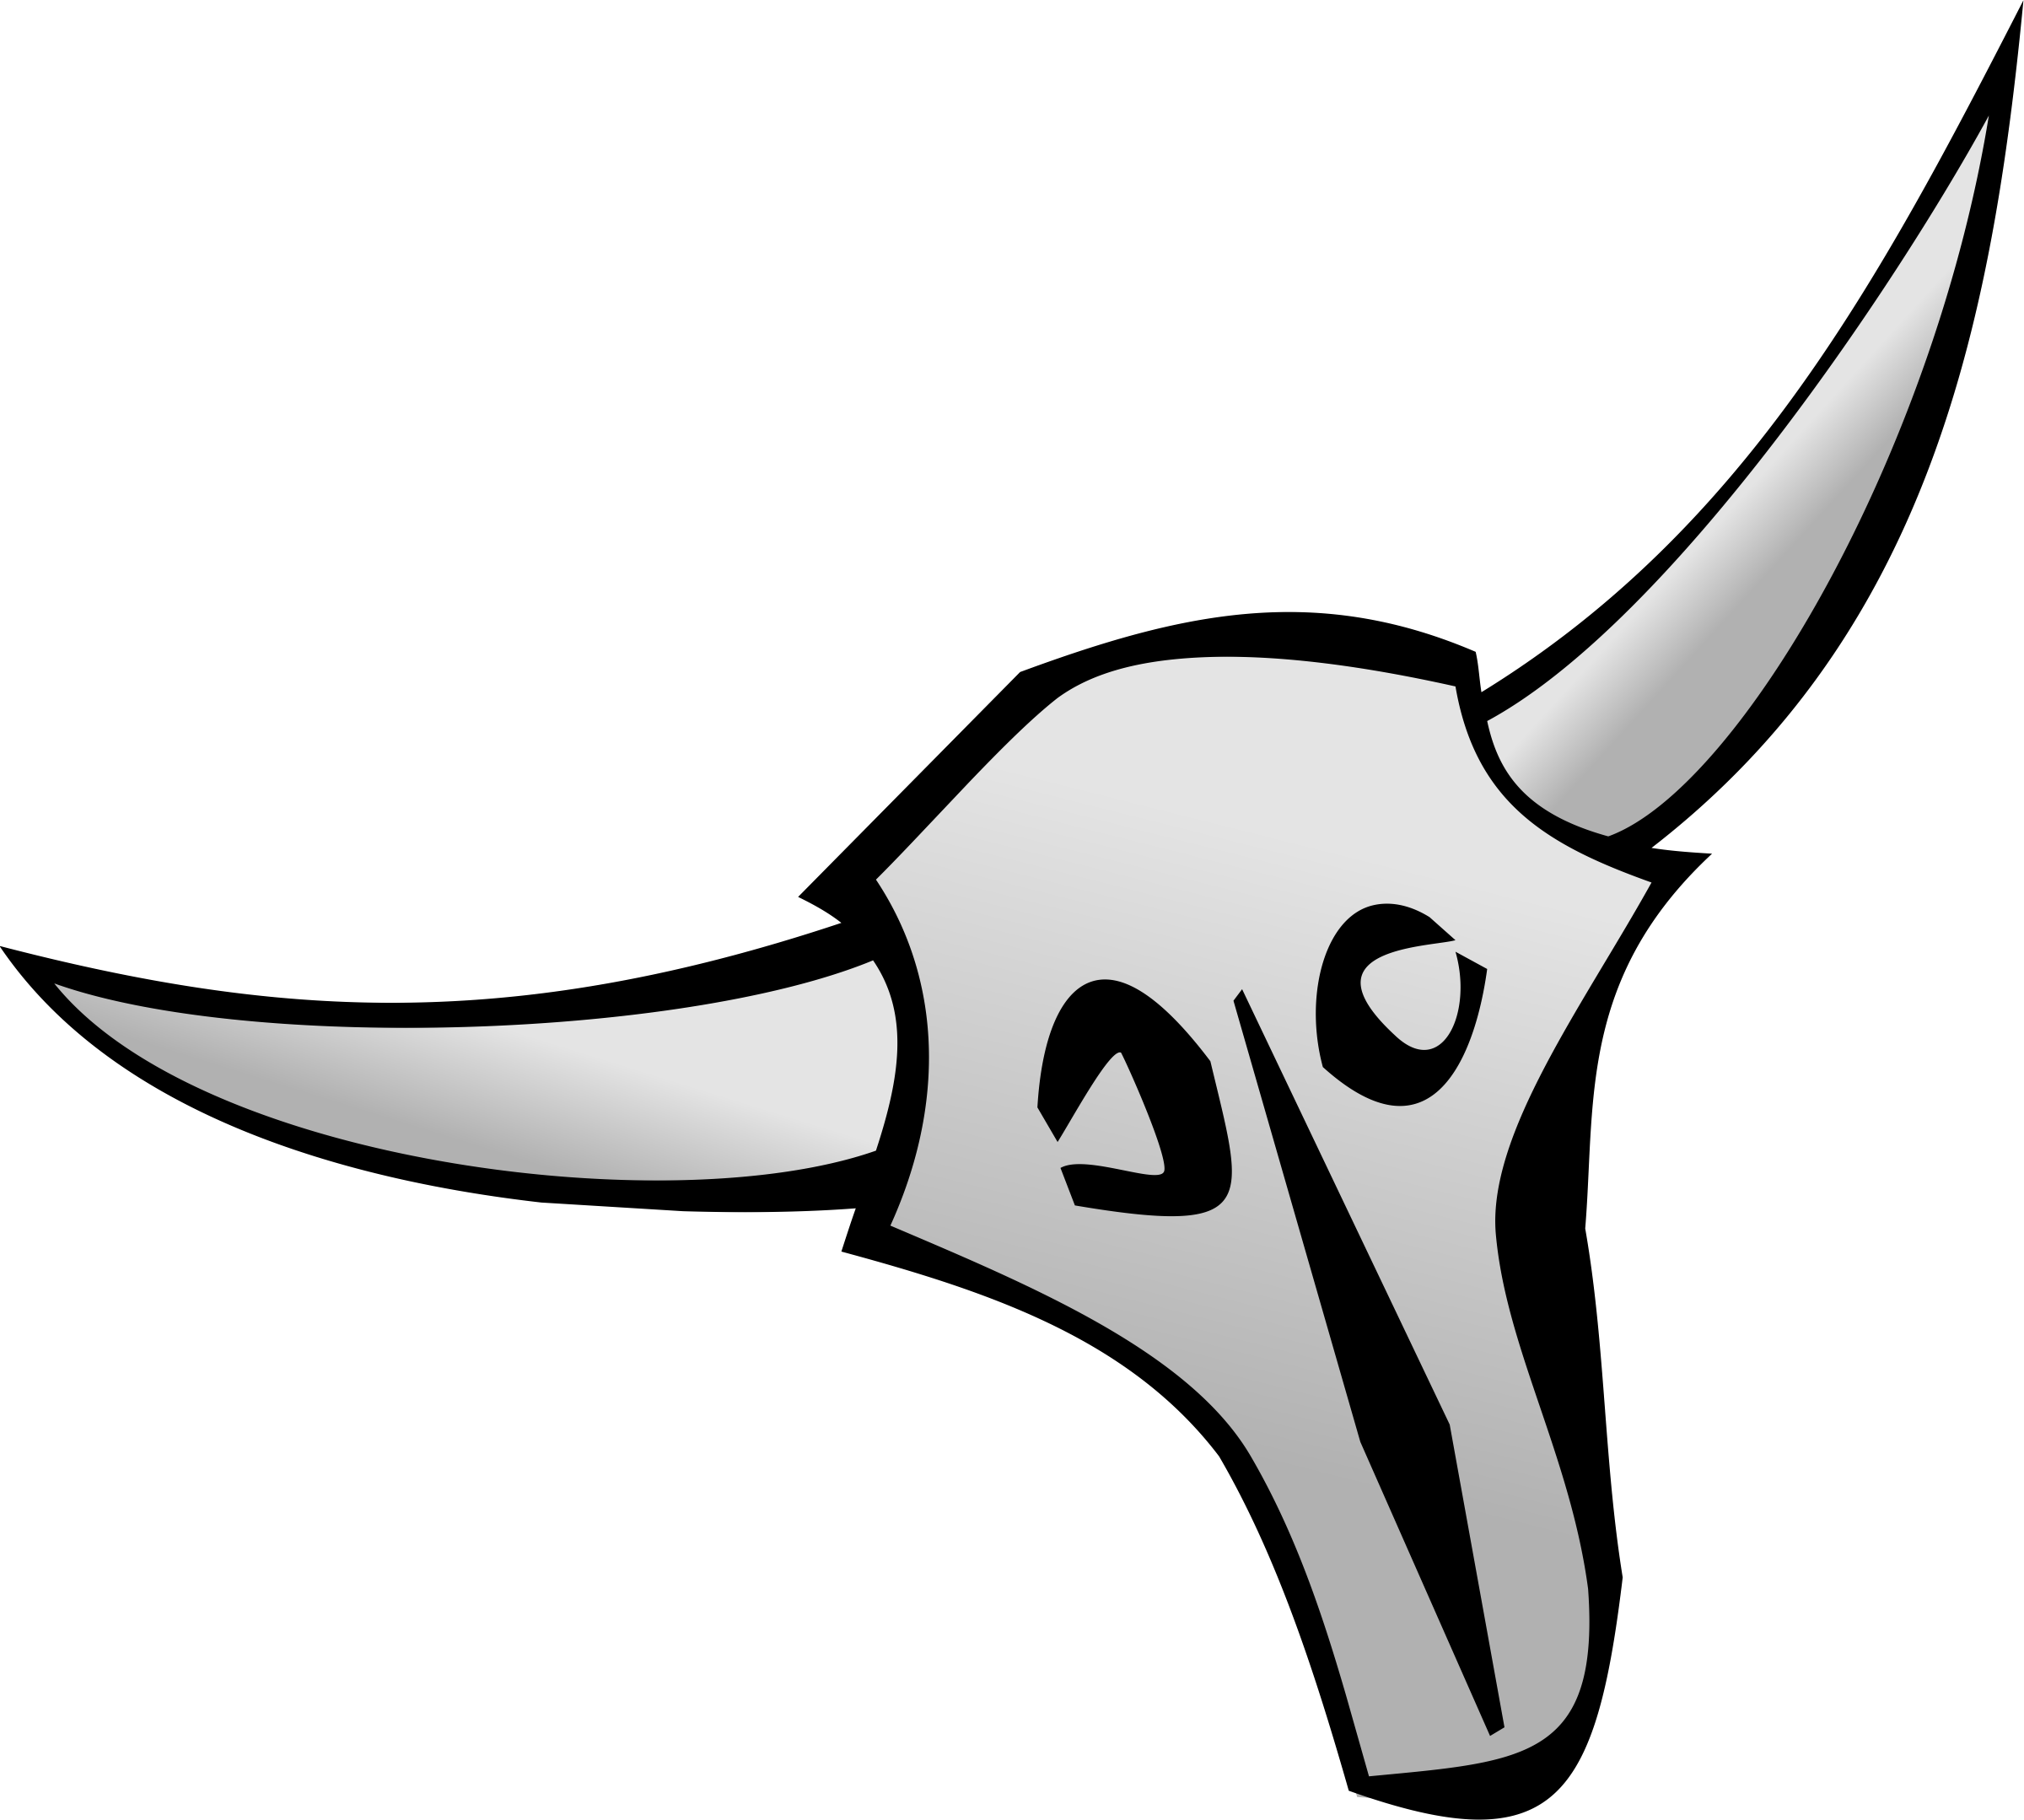 Clipart food minimalist. Cattle skull icons png